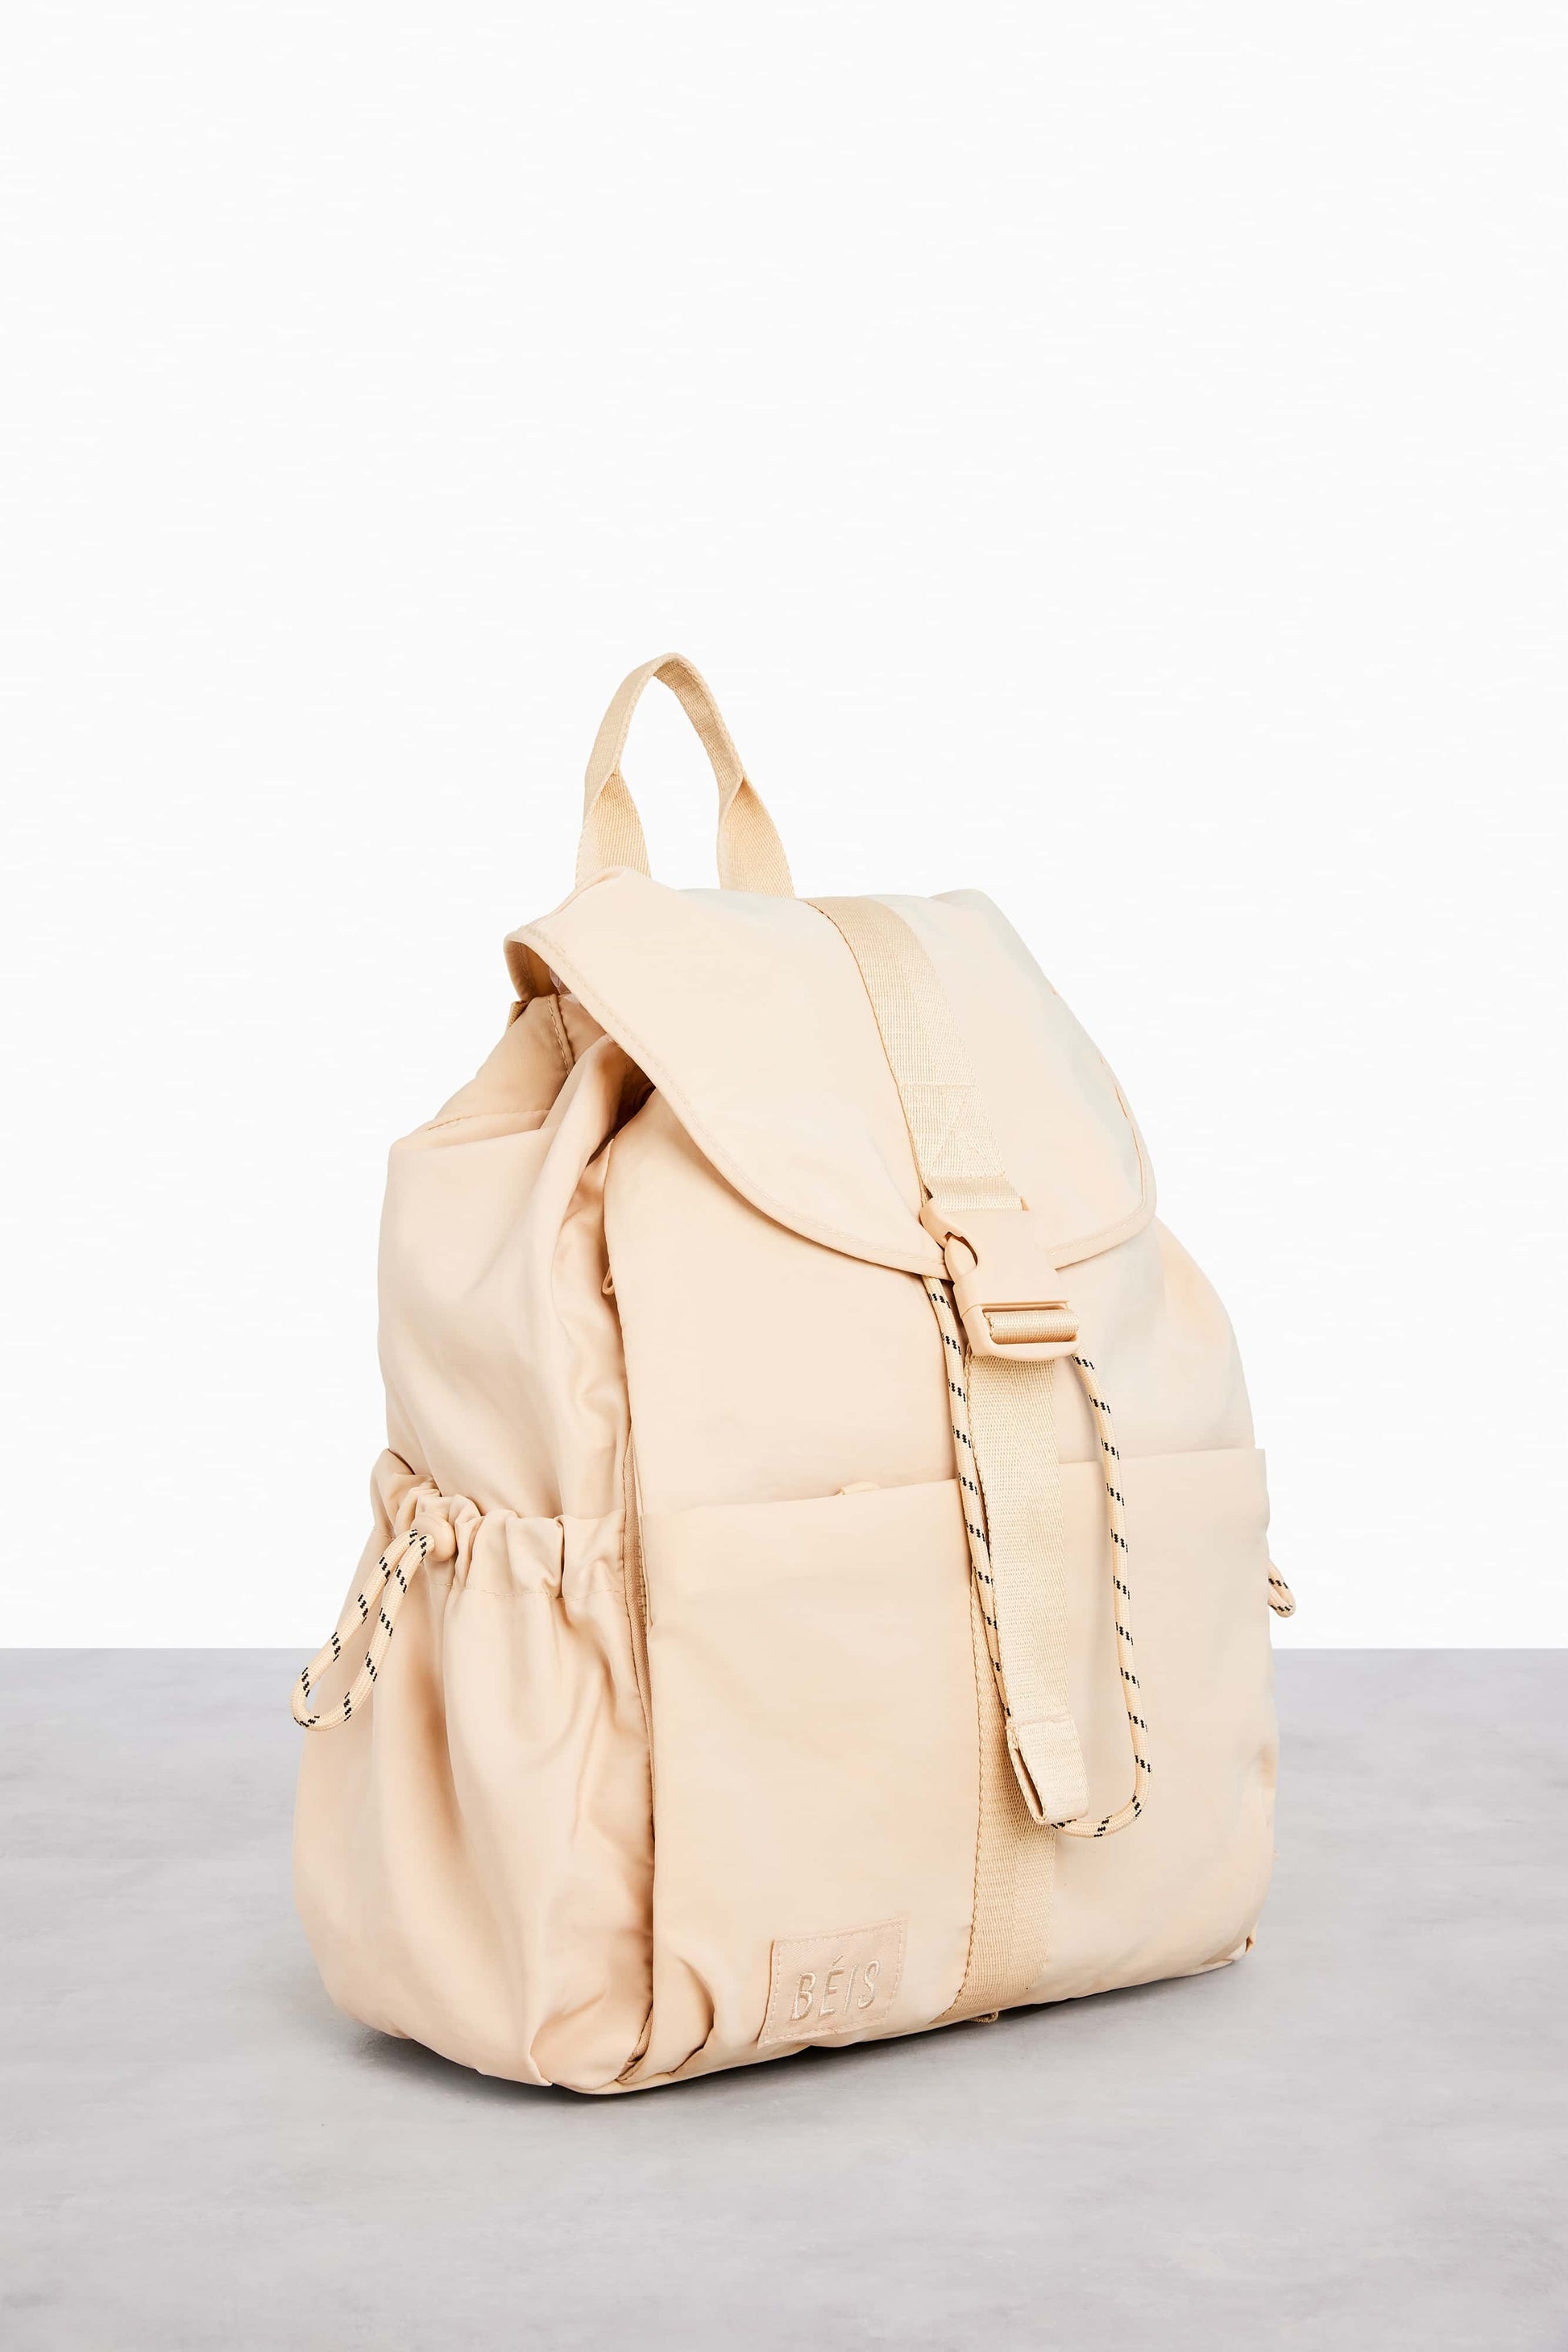 The Backpack Sport - in Chic Backpack Beige Tennis Inspired